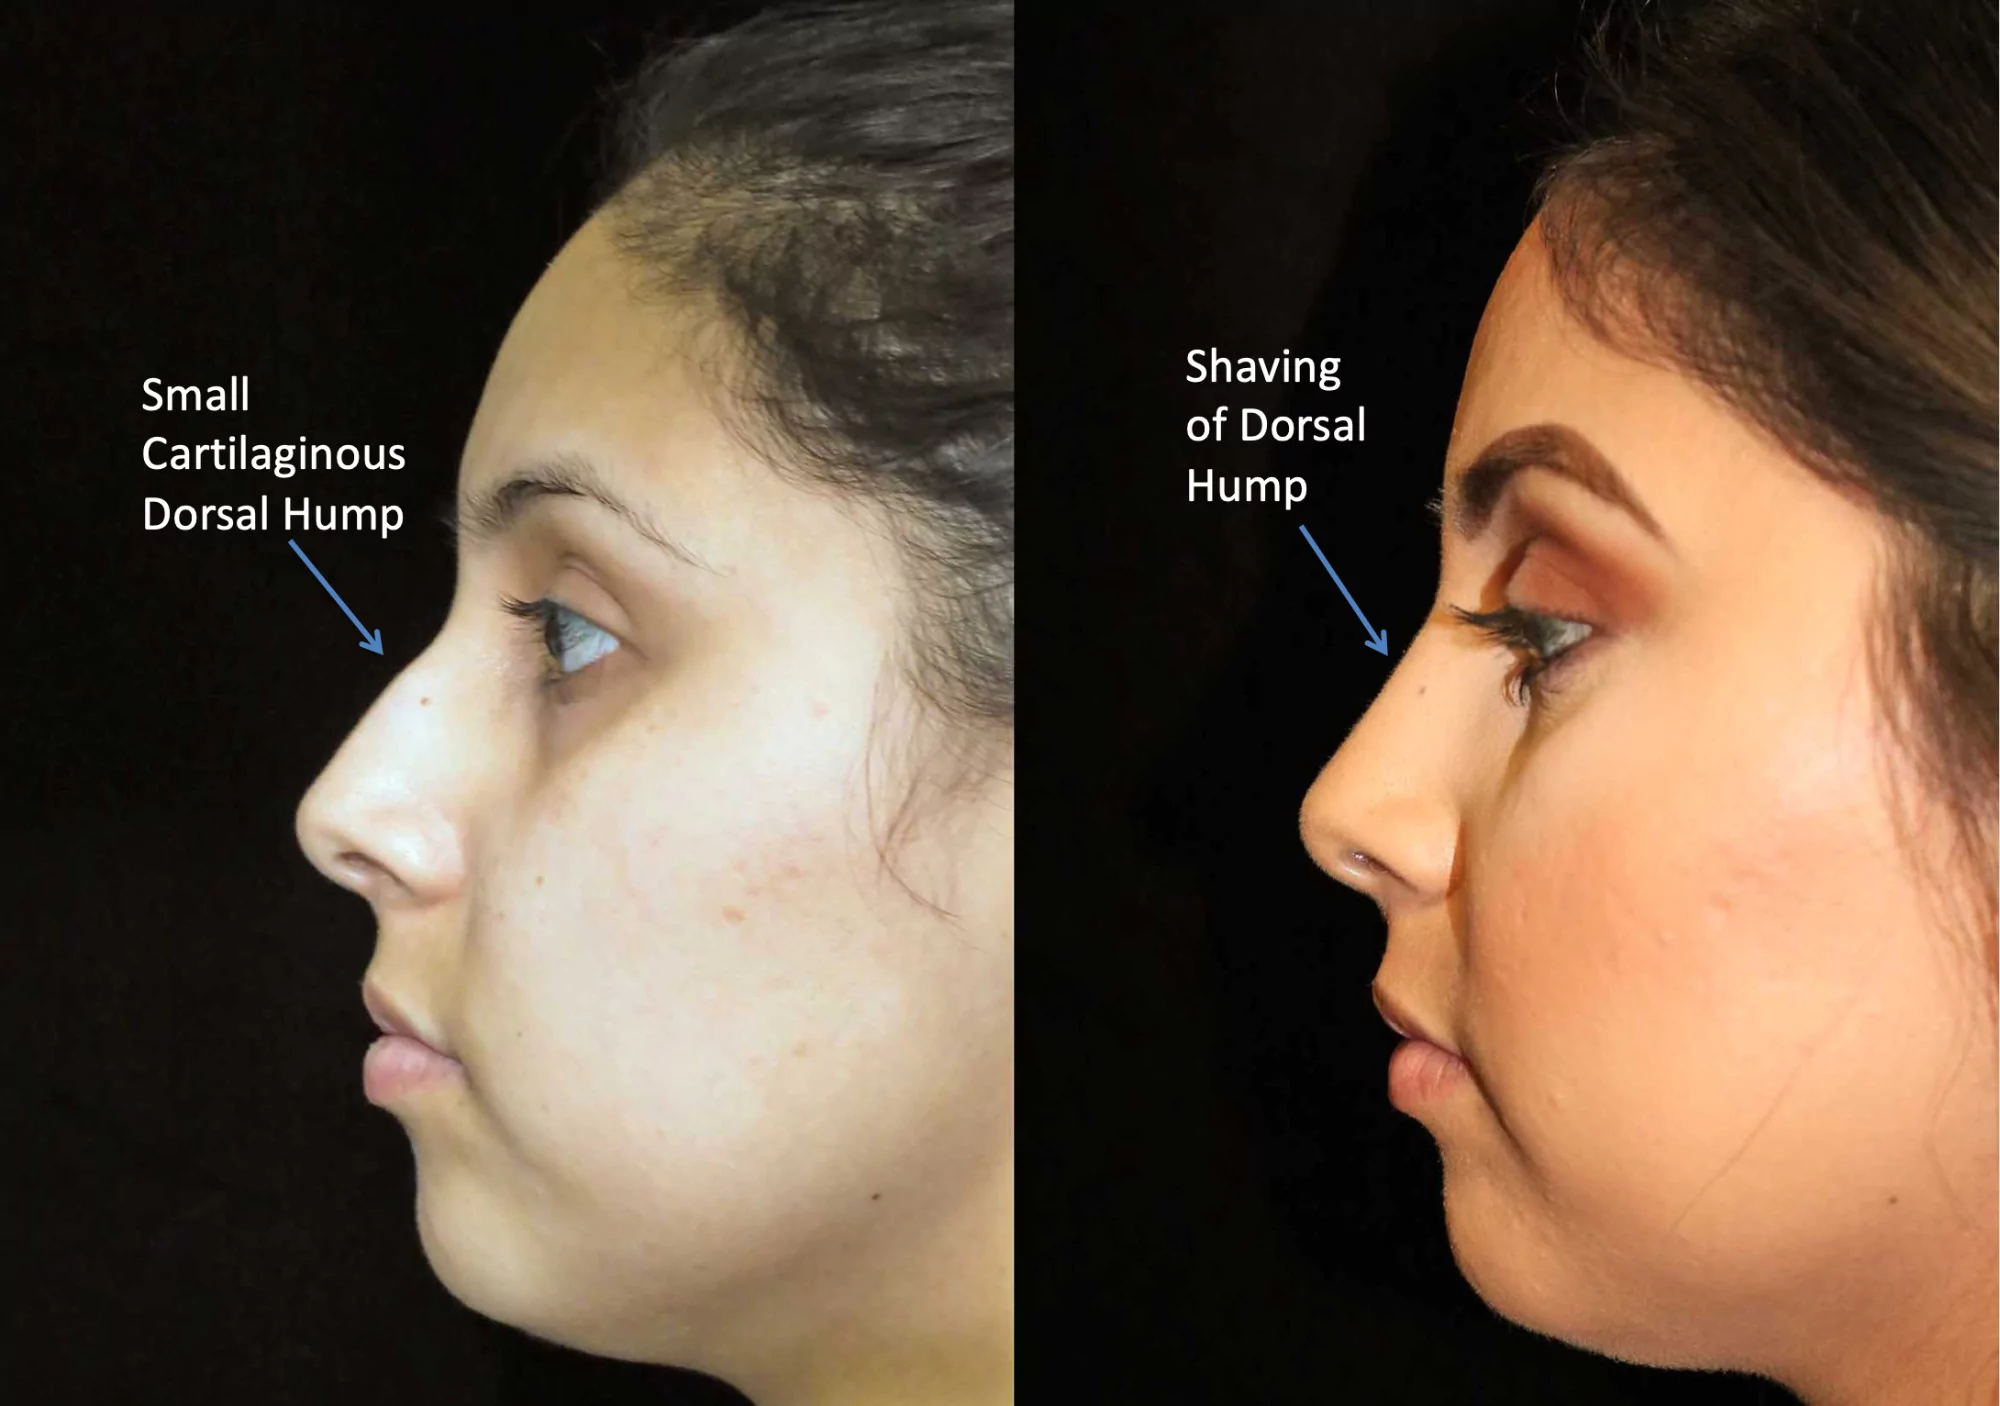 nose job before and after illustration of a woman with wide nasal bones